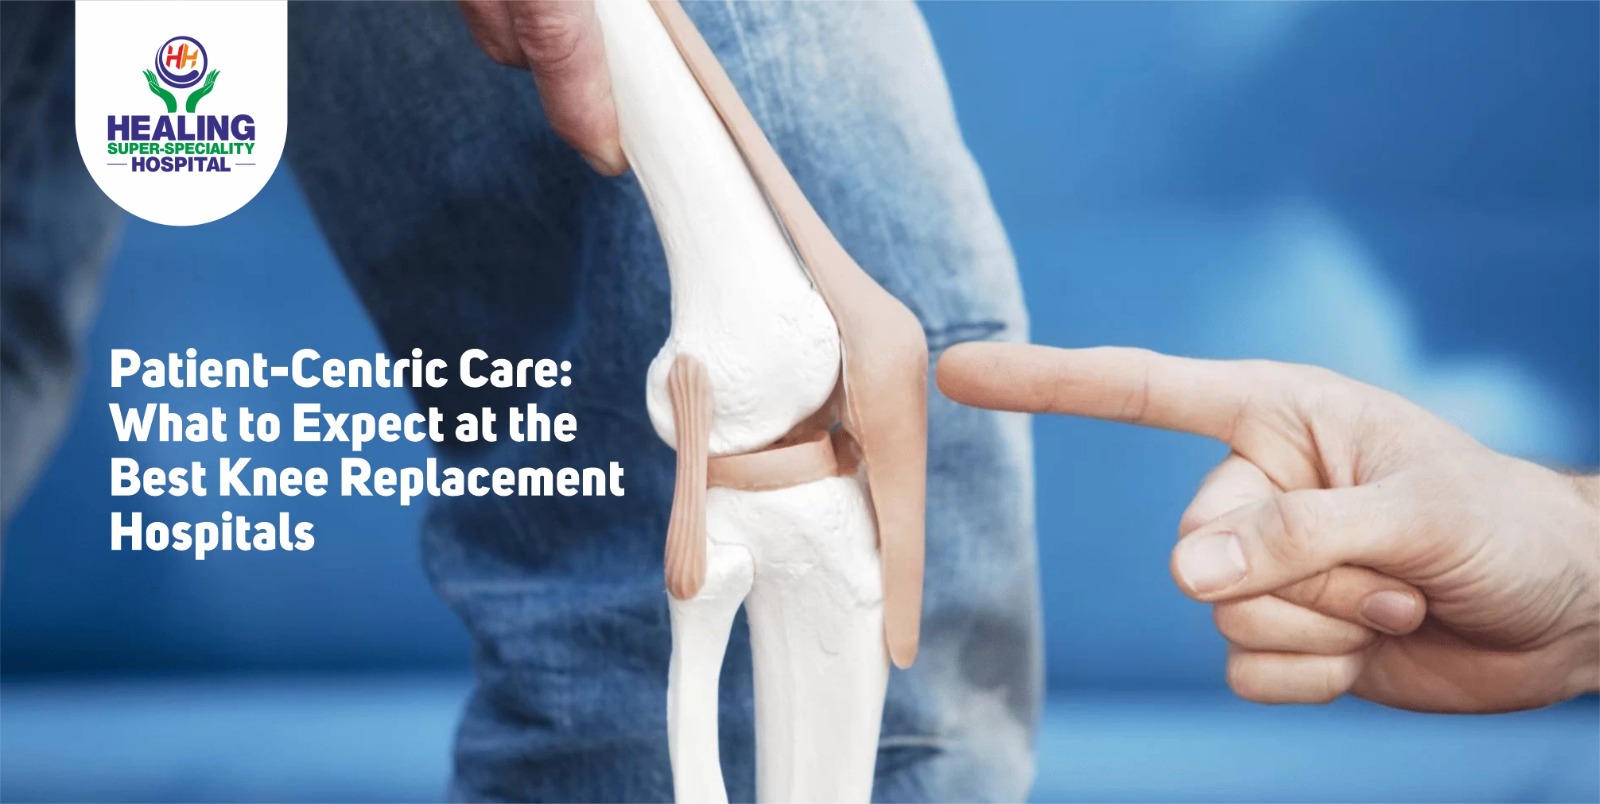 Patient-Centric Care: What to Expect at the Best Knee Replacement Hospitals